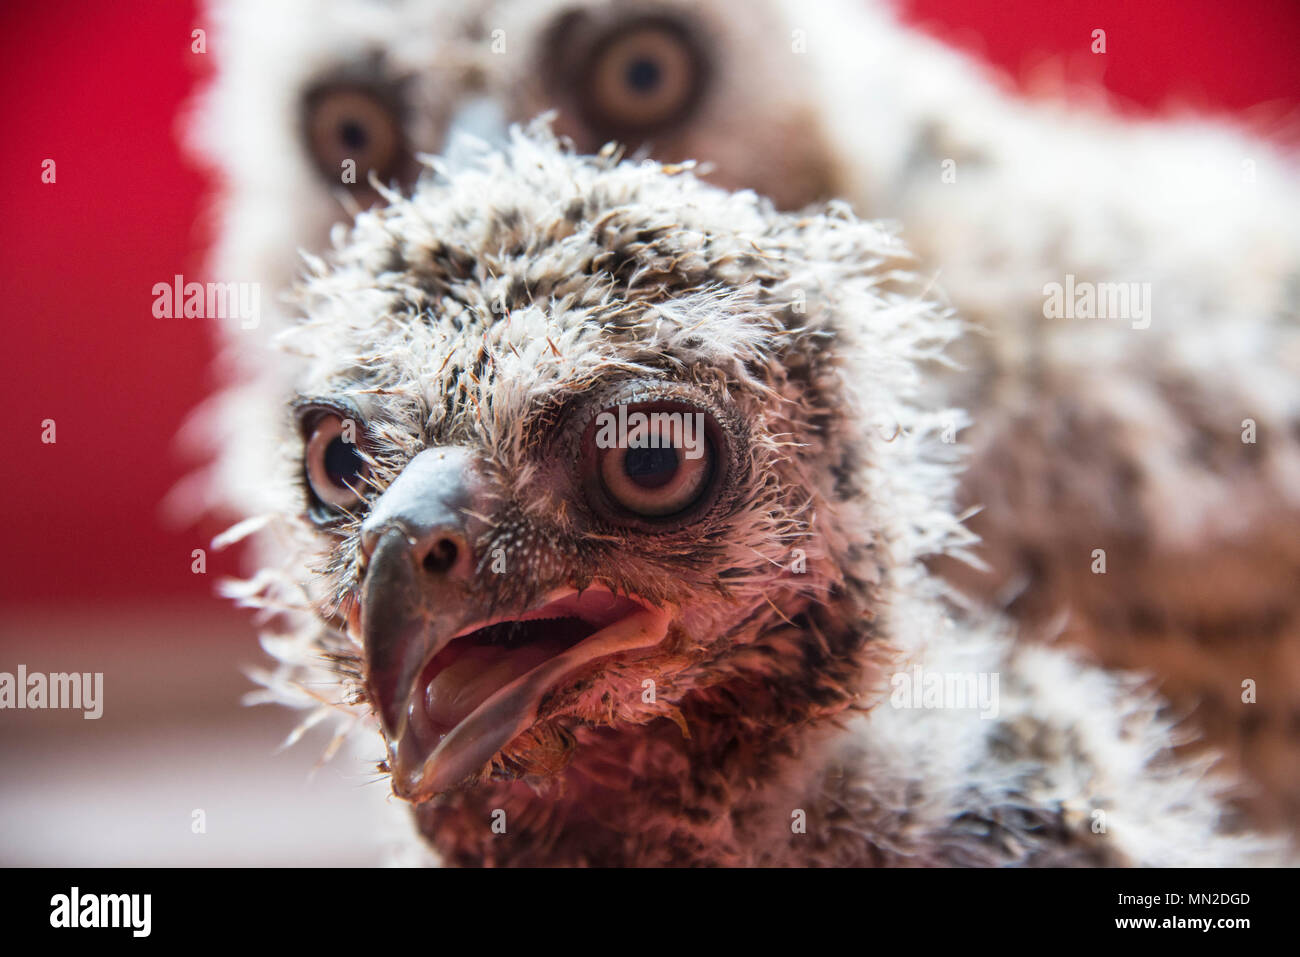 A pair of two week old Great Horned owls in a cage Stock Photo